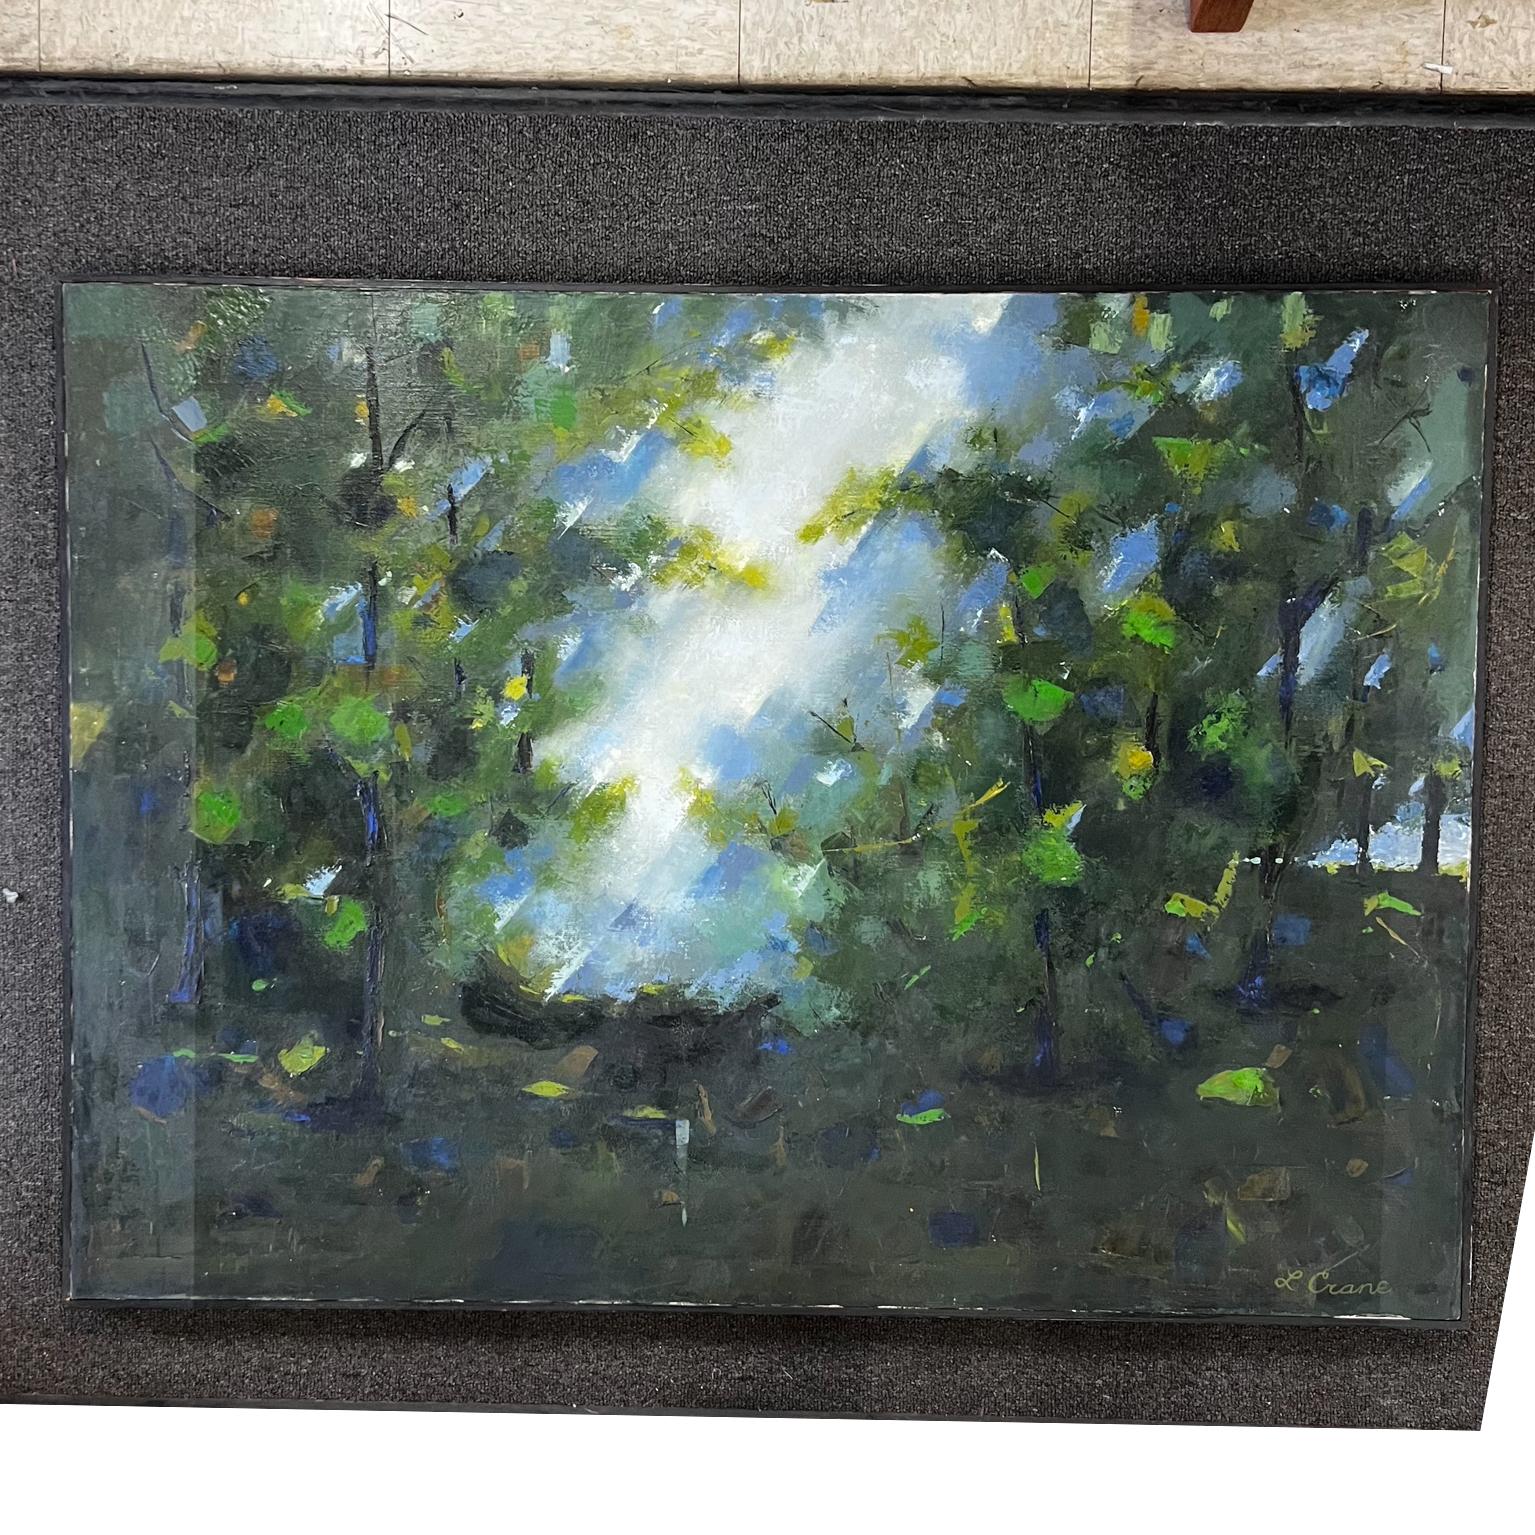 Signed L Crane, Oil on canvas. Landscape Nature Reflections.
Wood frame in black.
Abstract landscape, good control of light and shadows.
36.5 tall x 48.75 w x 1.5 D
Preowned Original vintage condition.
Refer to images.

